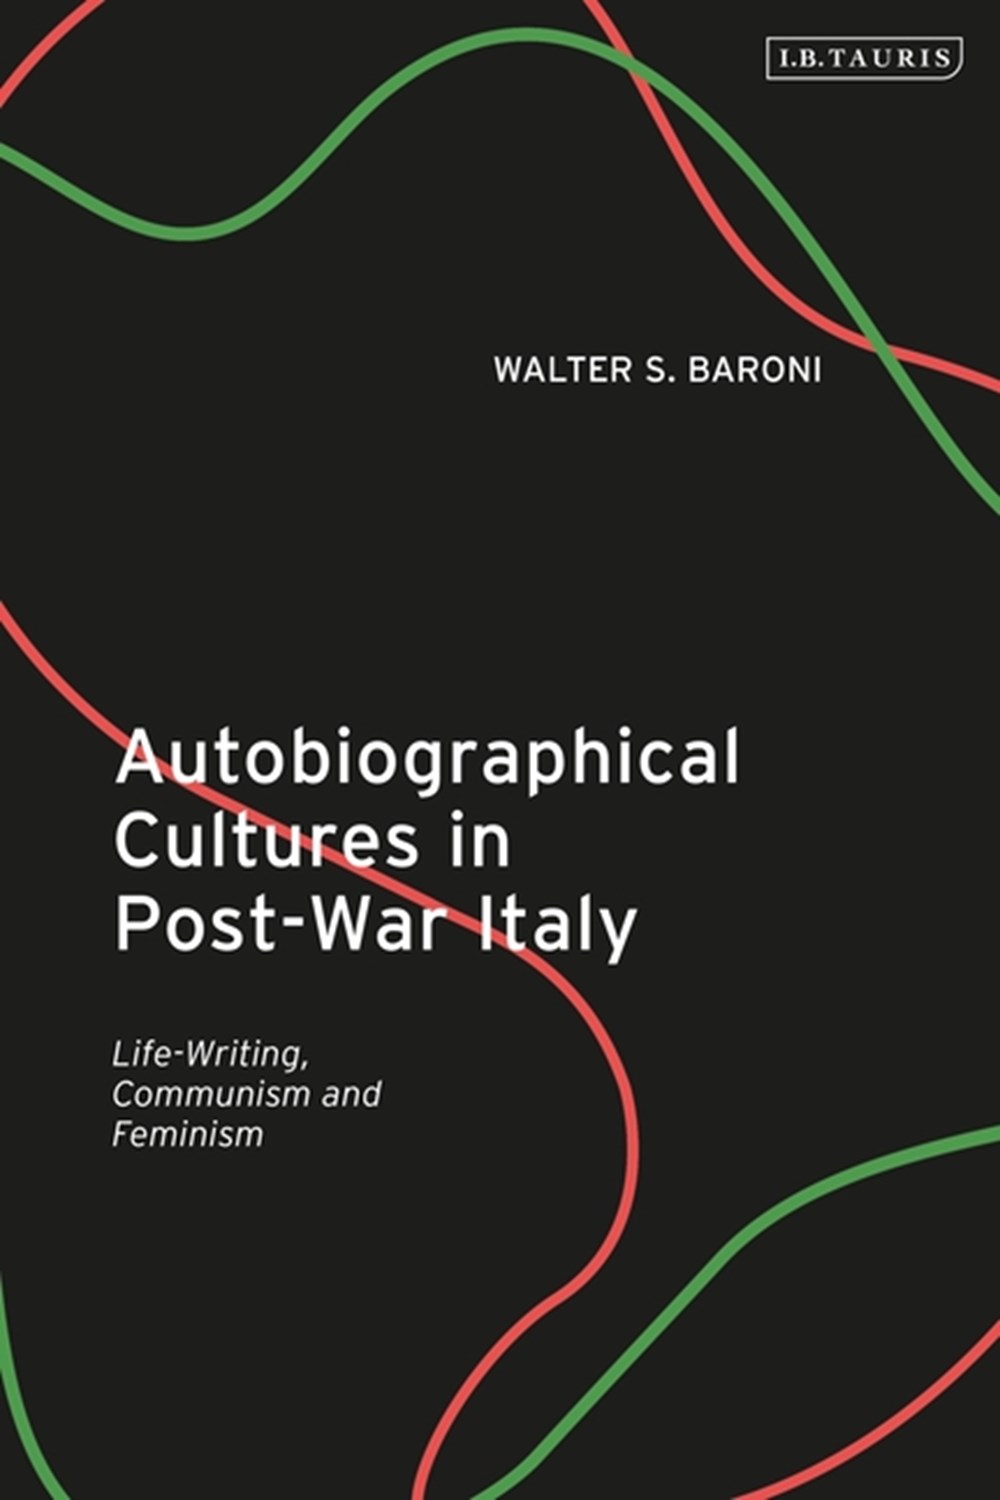 Autobiographical Cultures in Post-War Italy Life-Writing, Communism and Feminism